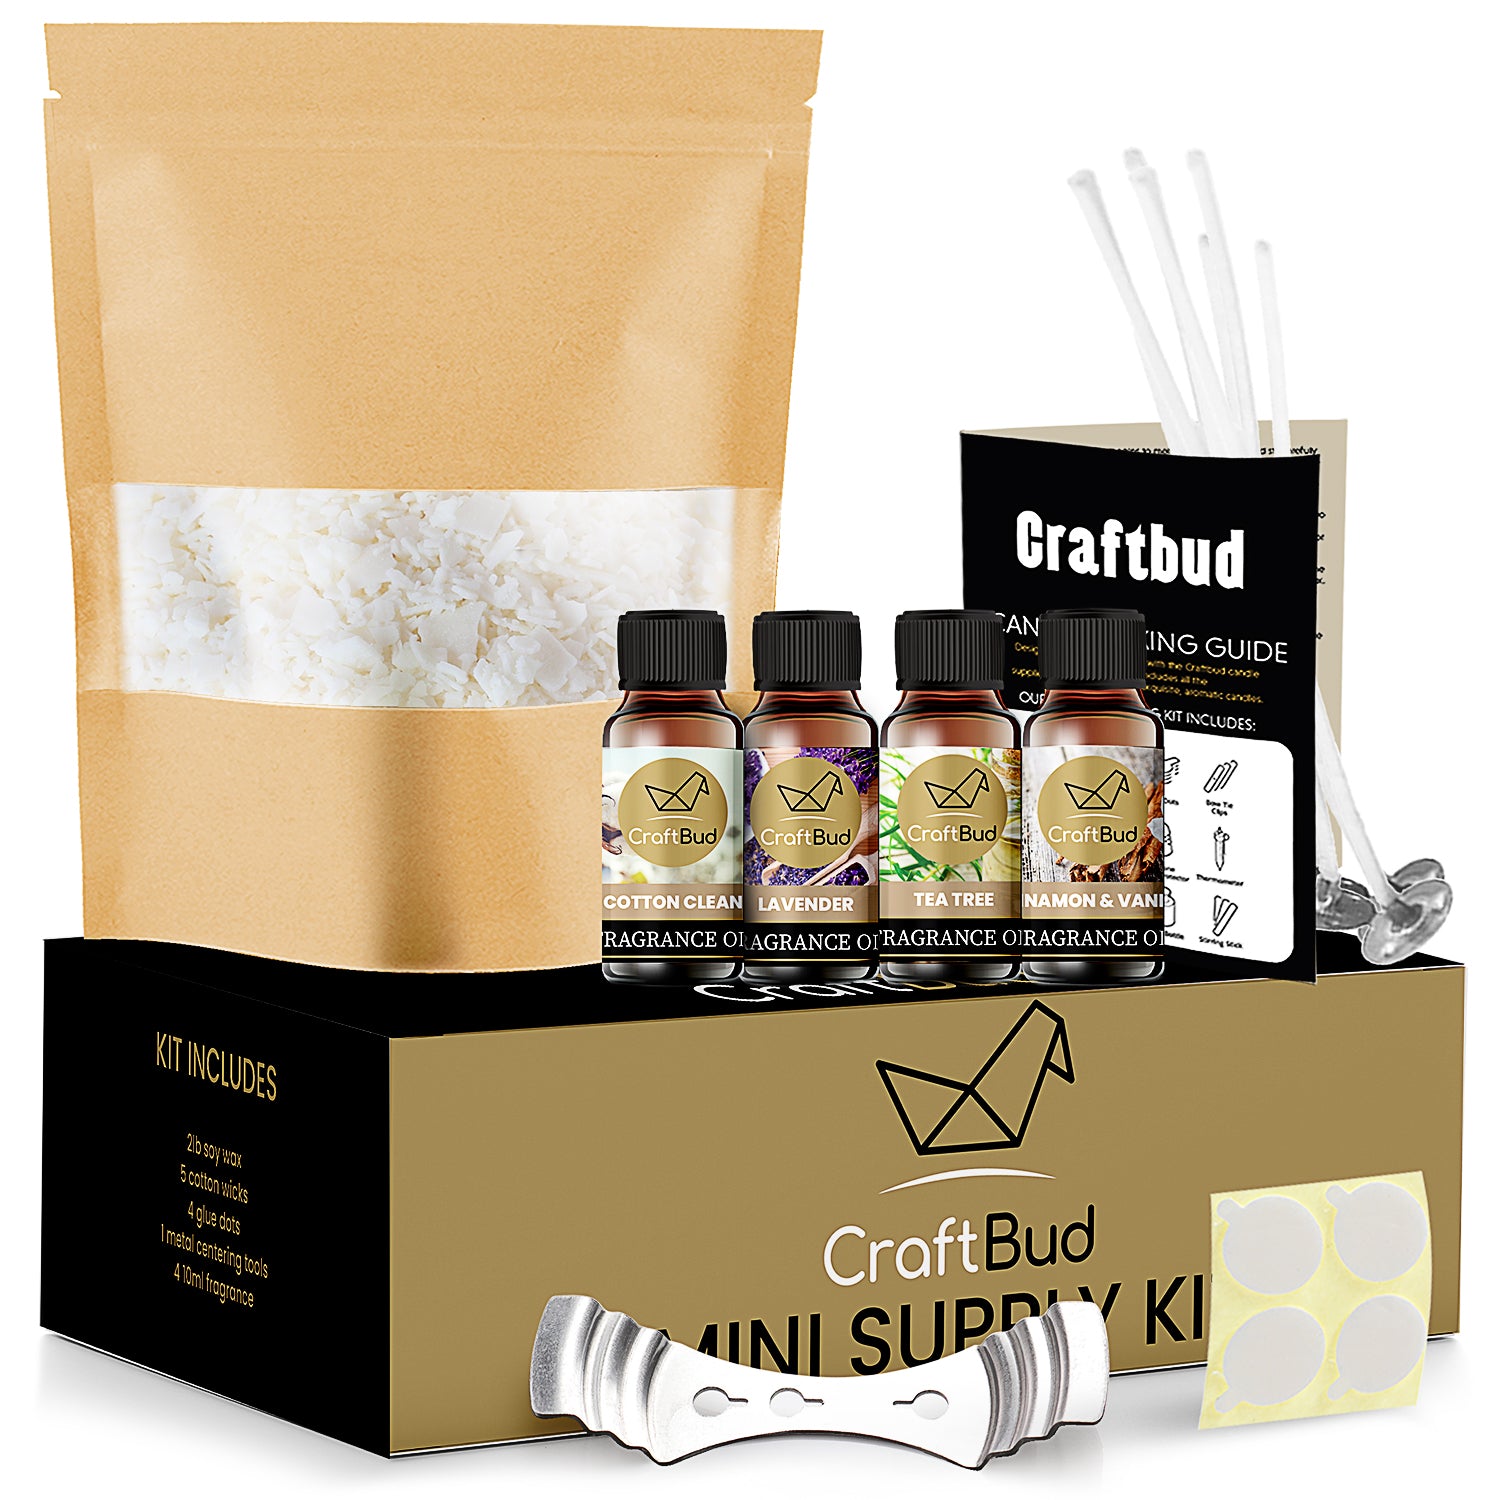 Craftbud DIY Candle Making Mini Supply Kit - 2lbs Natural Soy Wax, Fragrance Oil, Cotton Wicks, Centering Tool, and Glue Sticker - Multi